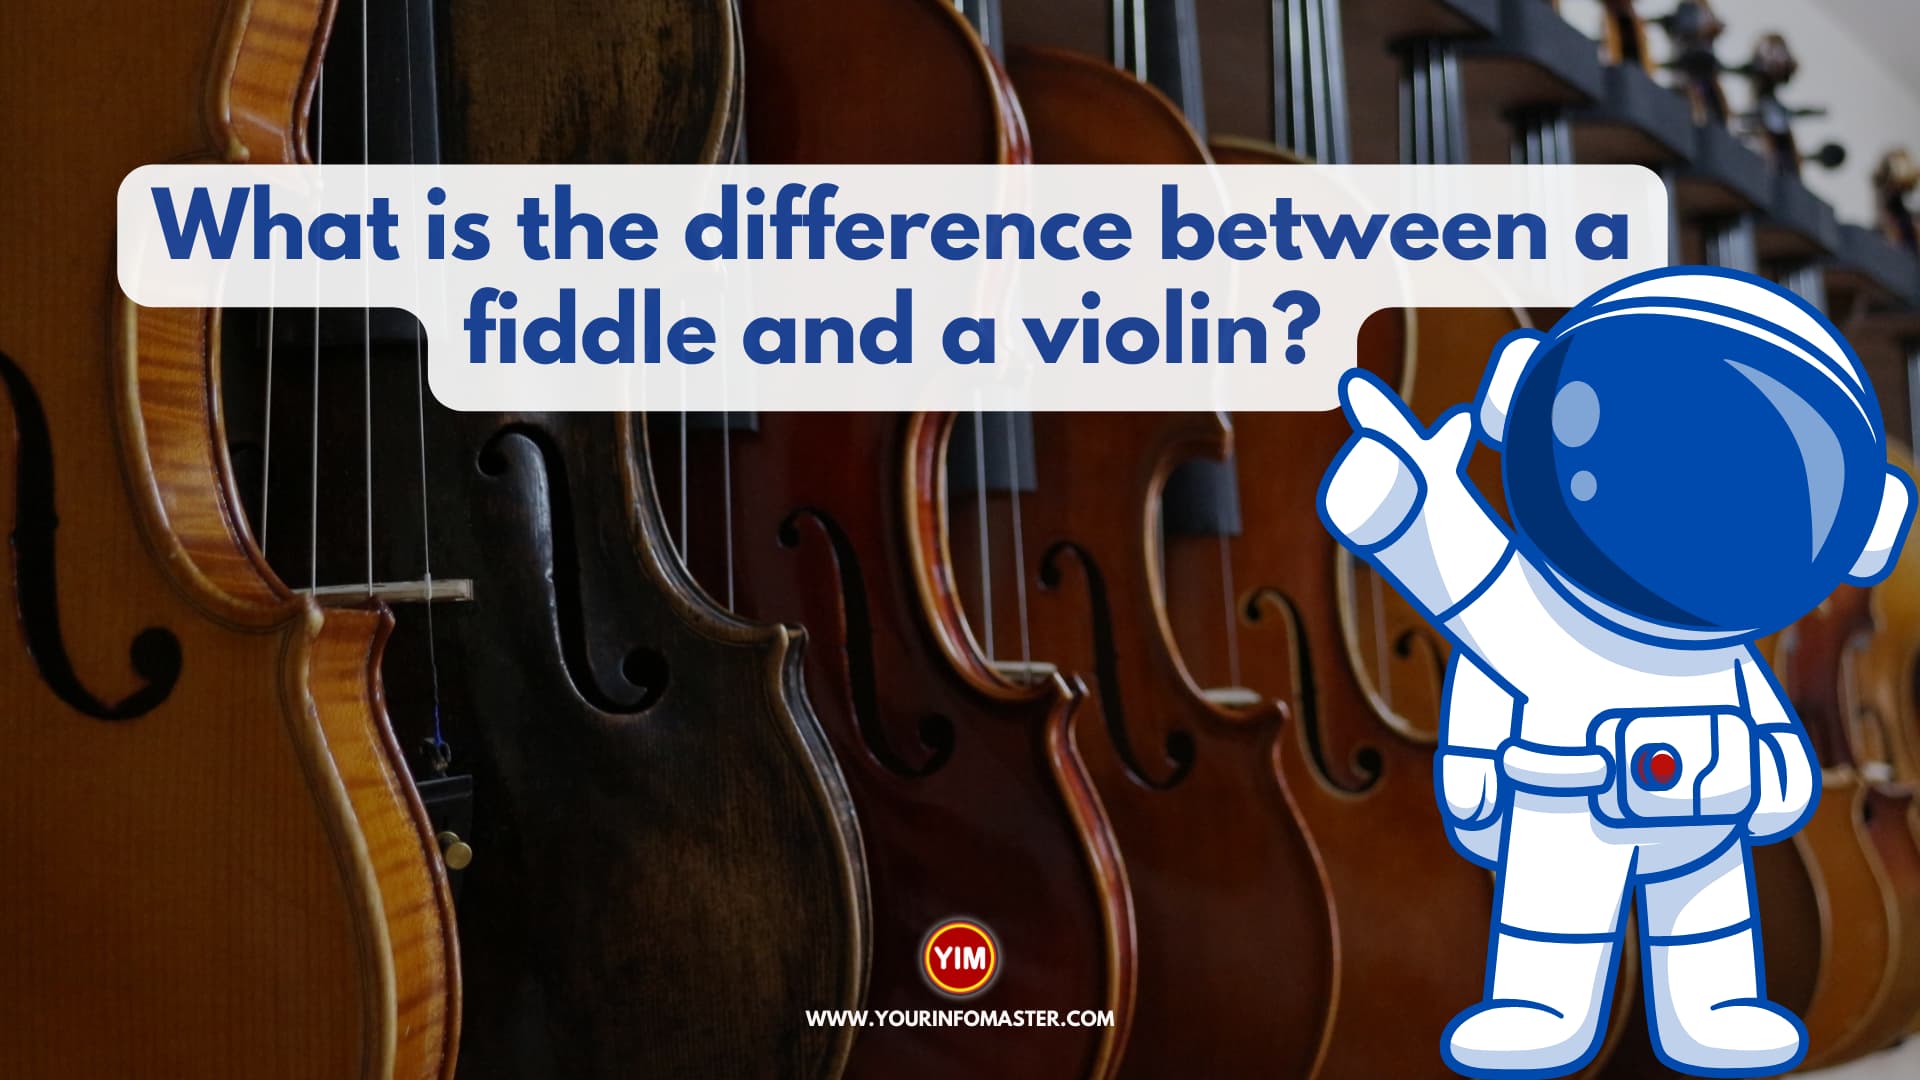 What is the difference between a fiddle and a violin